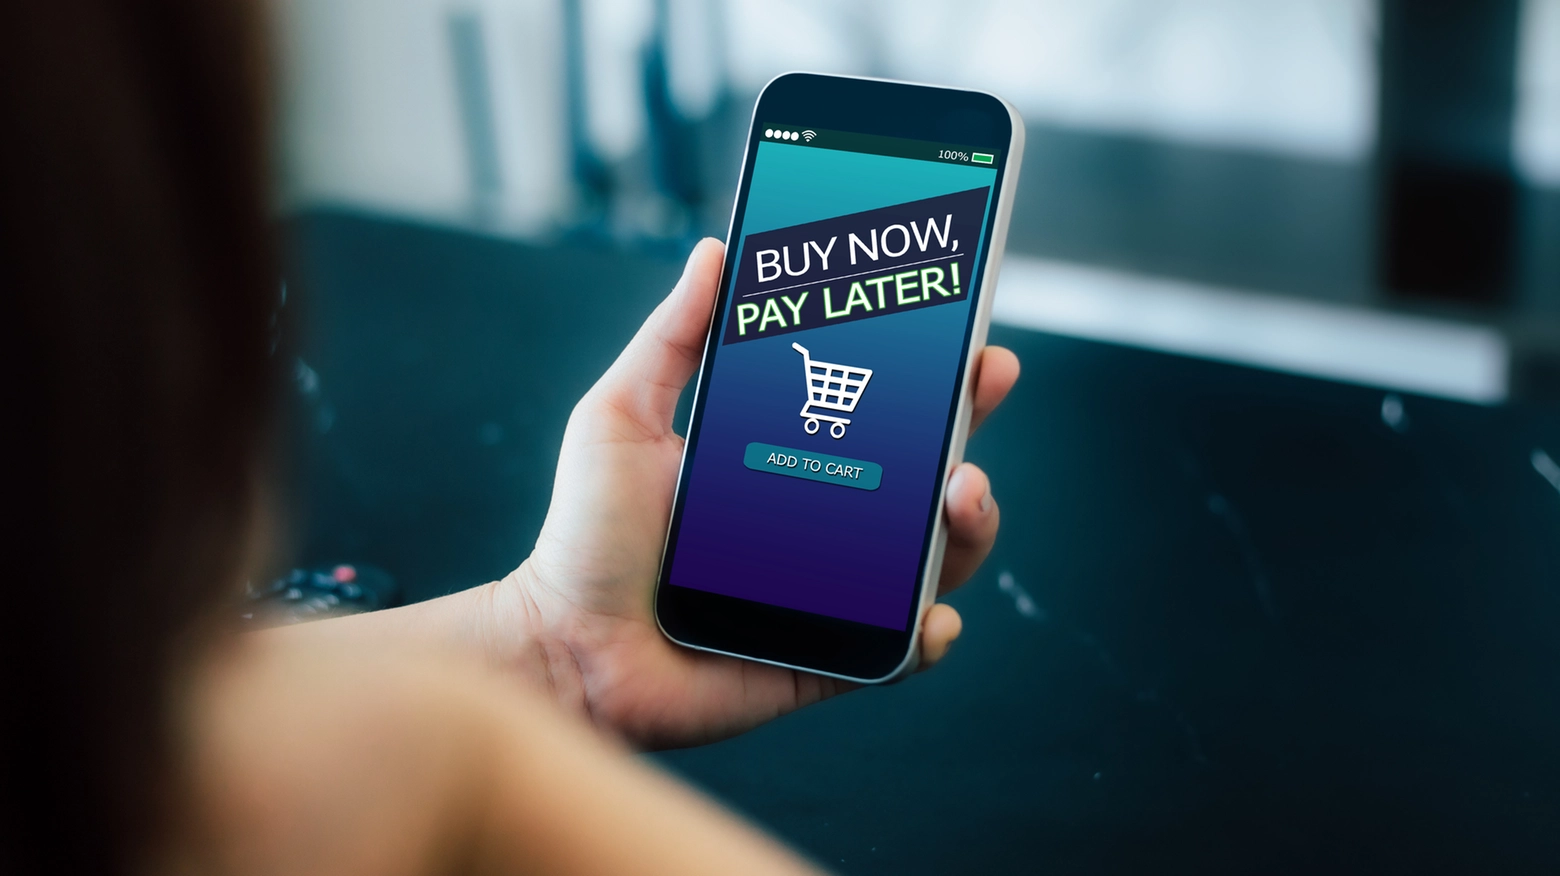 Buy now pay later - Crediti iStock Photo